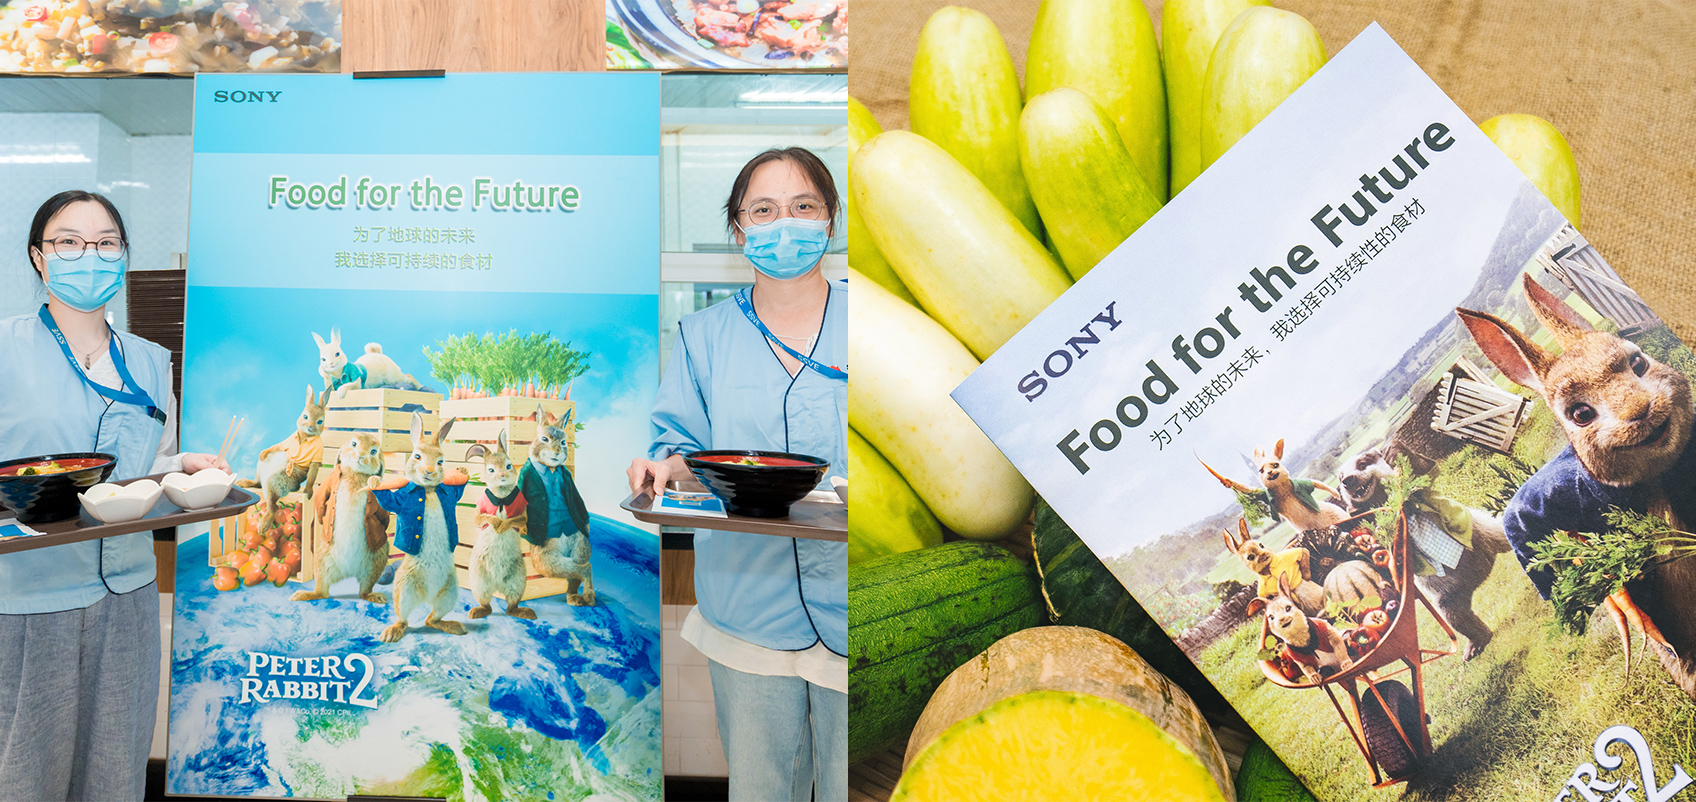 "(Left) Employees standing in front of the ""Food for the Future"" banner
(Right) Vegetables and a pamphlet with ""Food for the Future"" written on it"